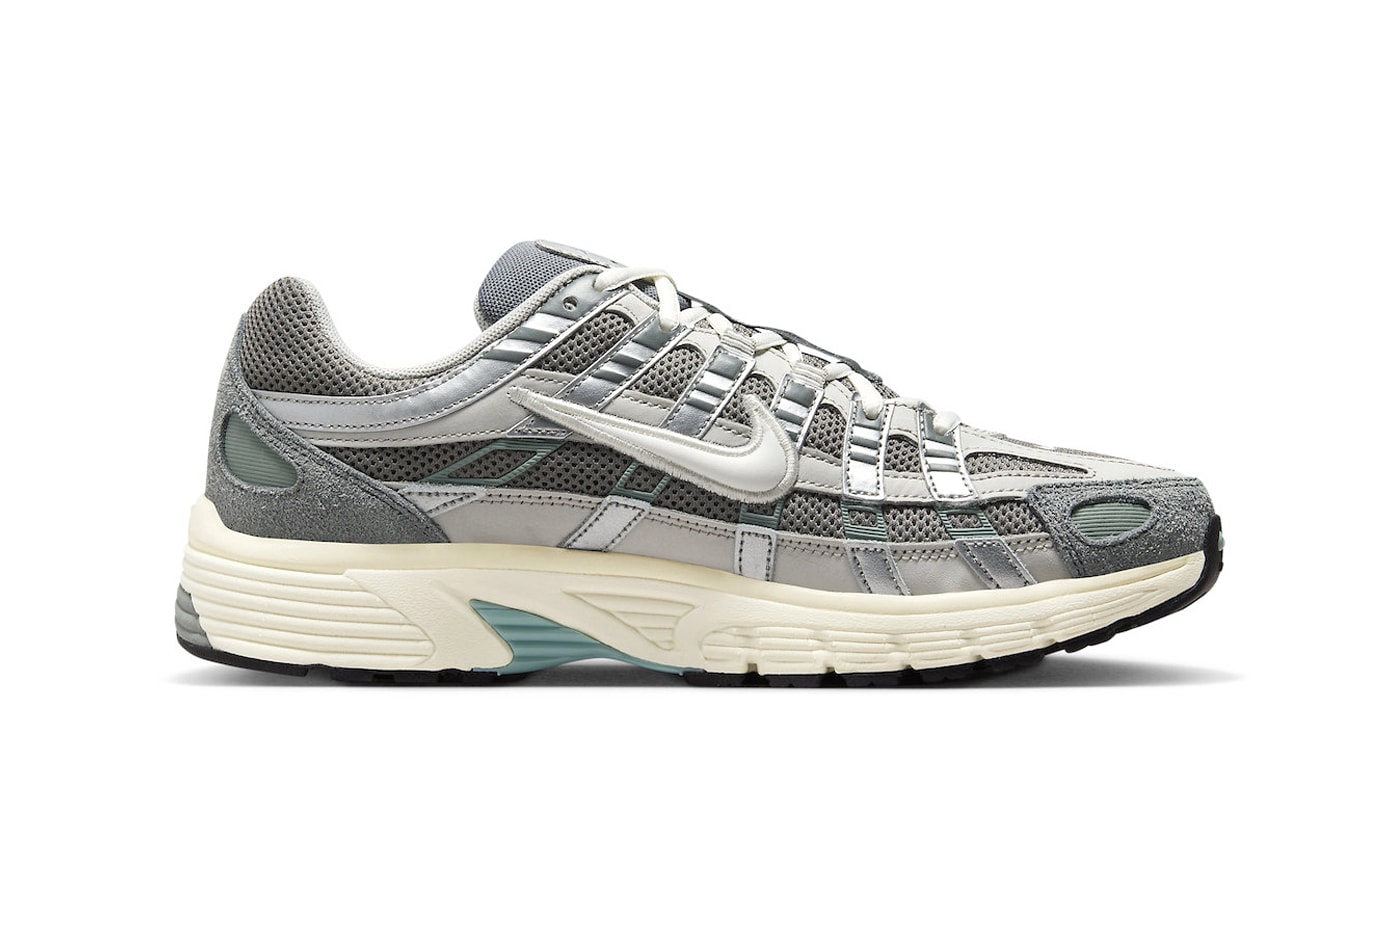 Nike P-6000 "Flat Pewter" Is Set To Arrive by the End of the Year holiday 2023 Flat Pewter/Light Iron Ore-Metallic Silver-White technical shoe runners swoosh